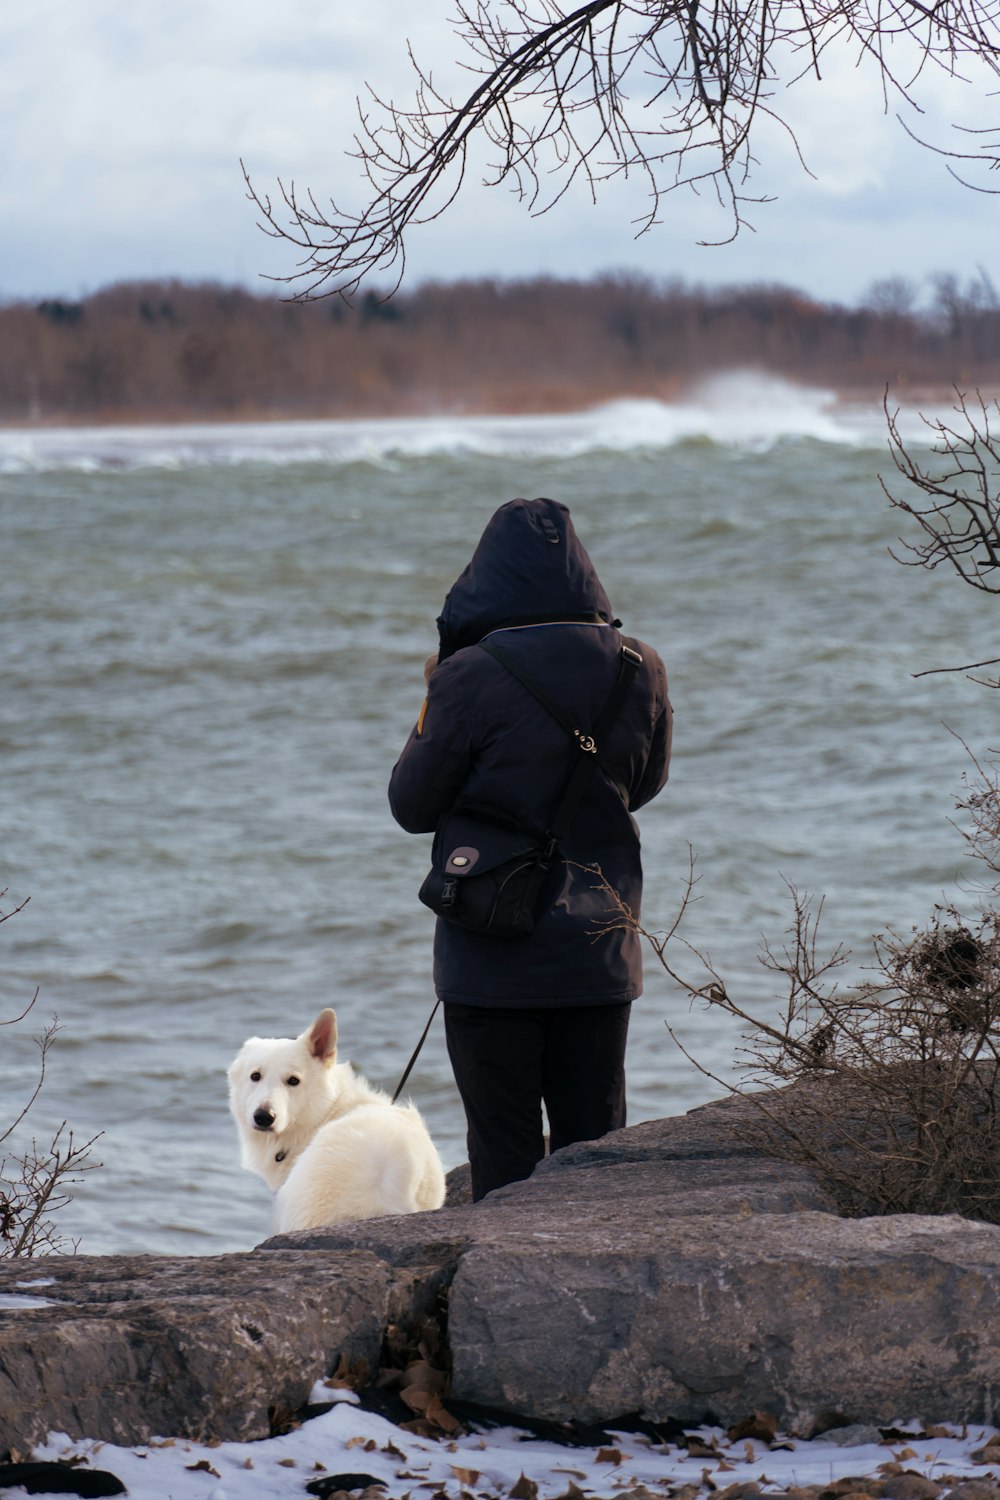 a person standing next to a white dog on a leash